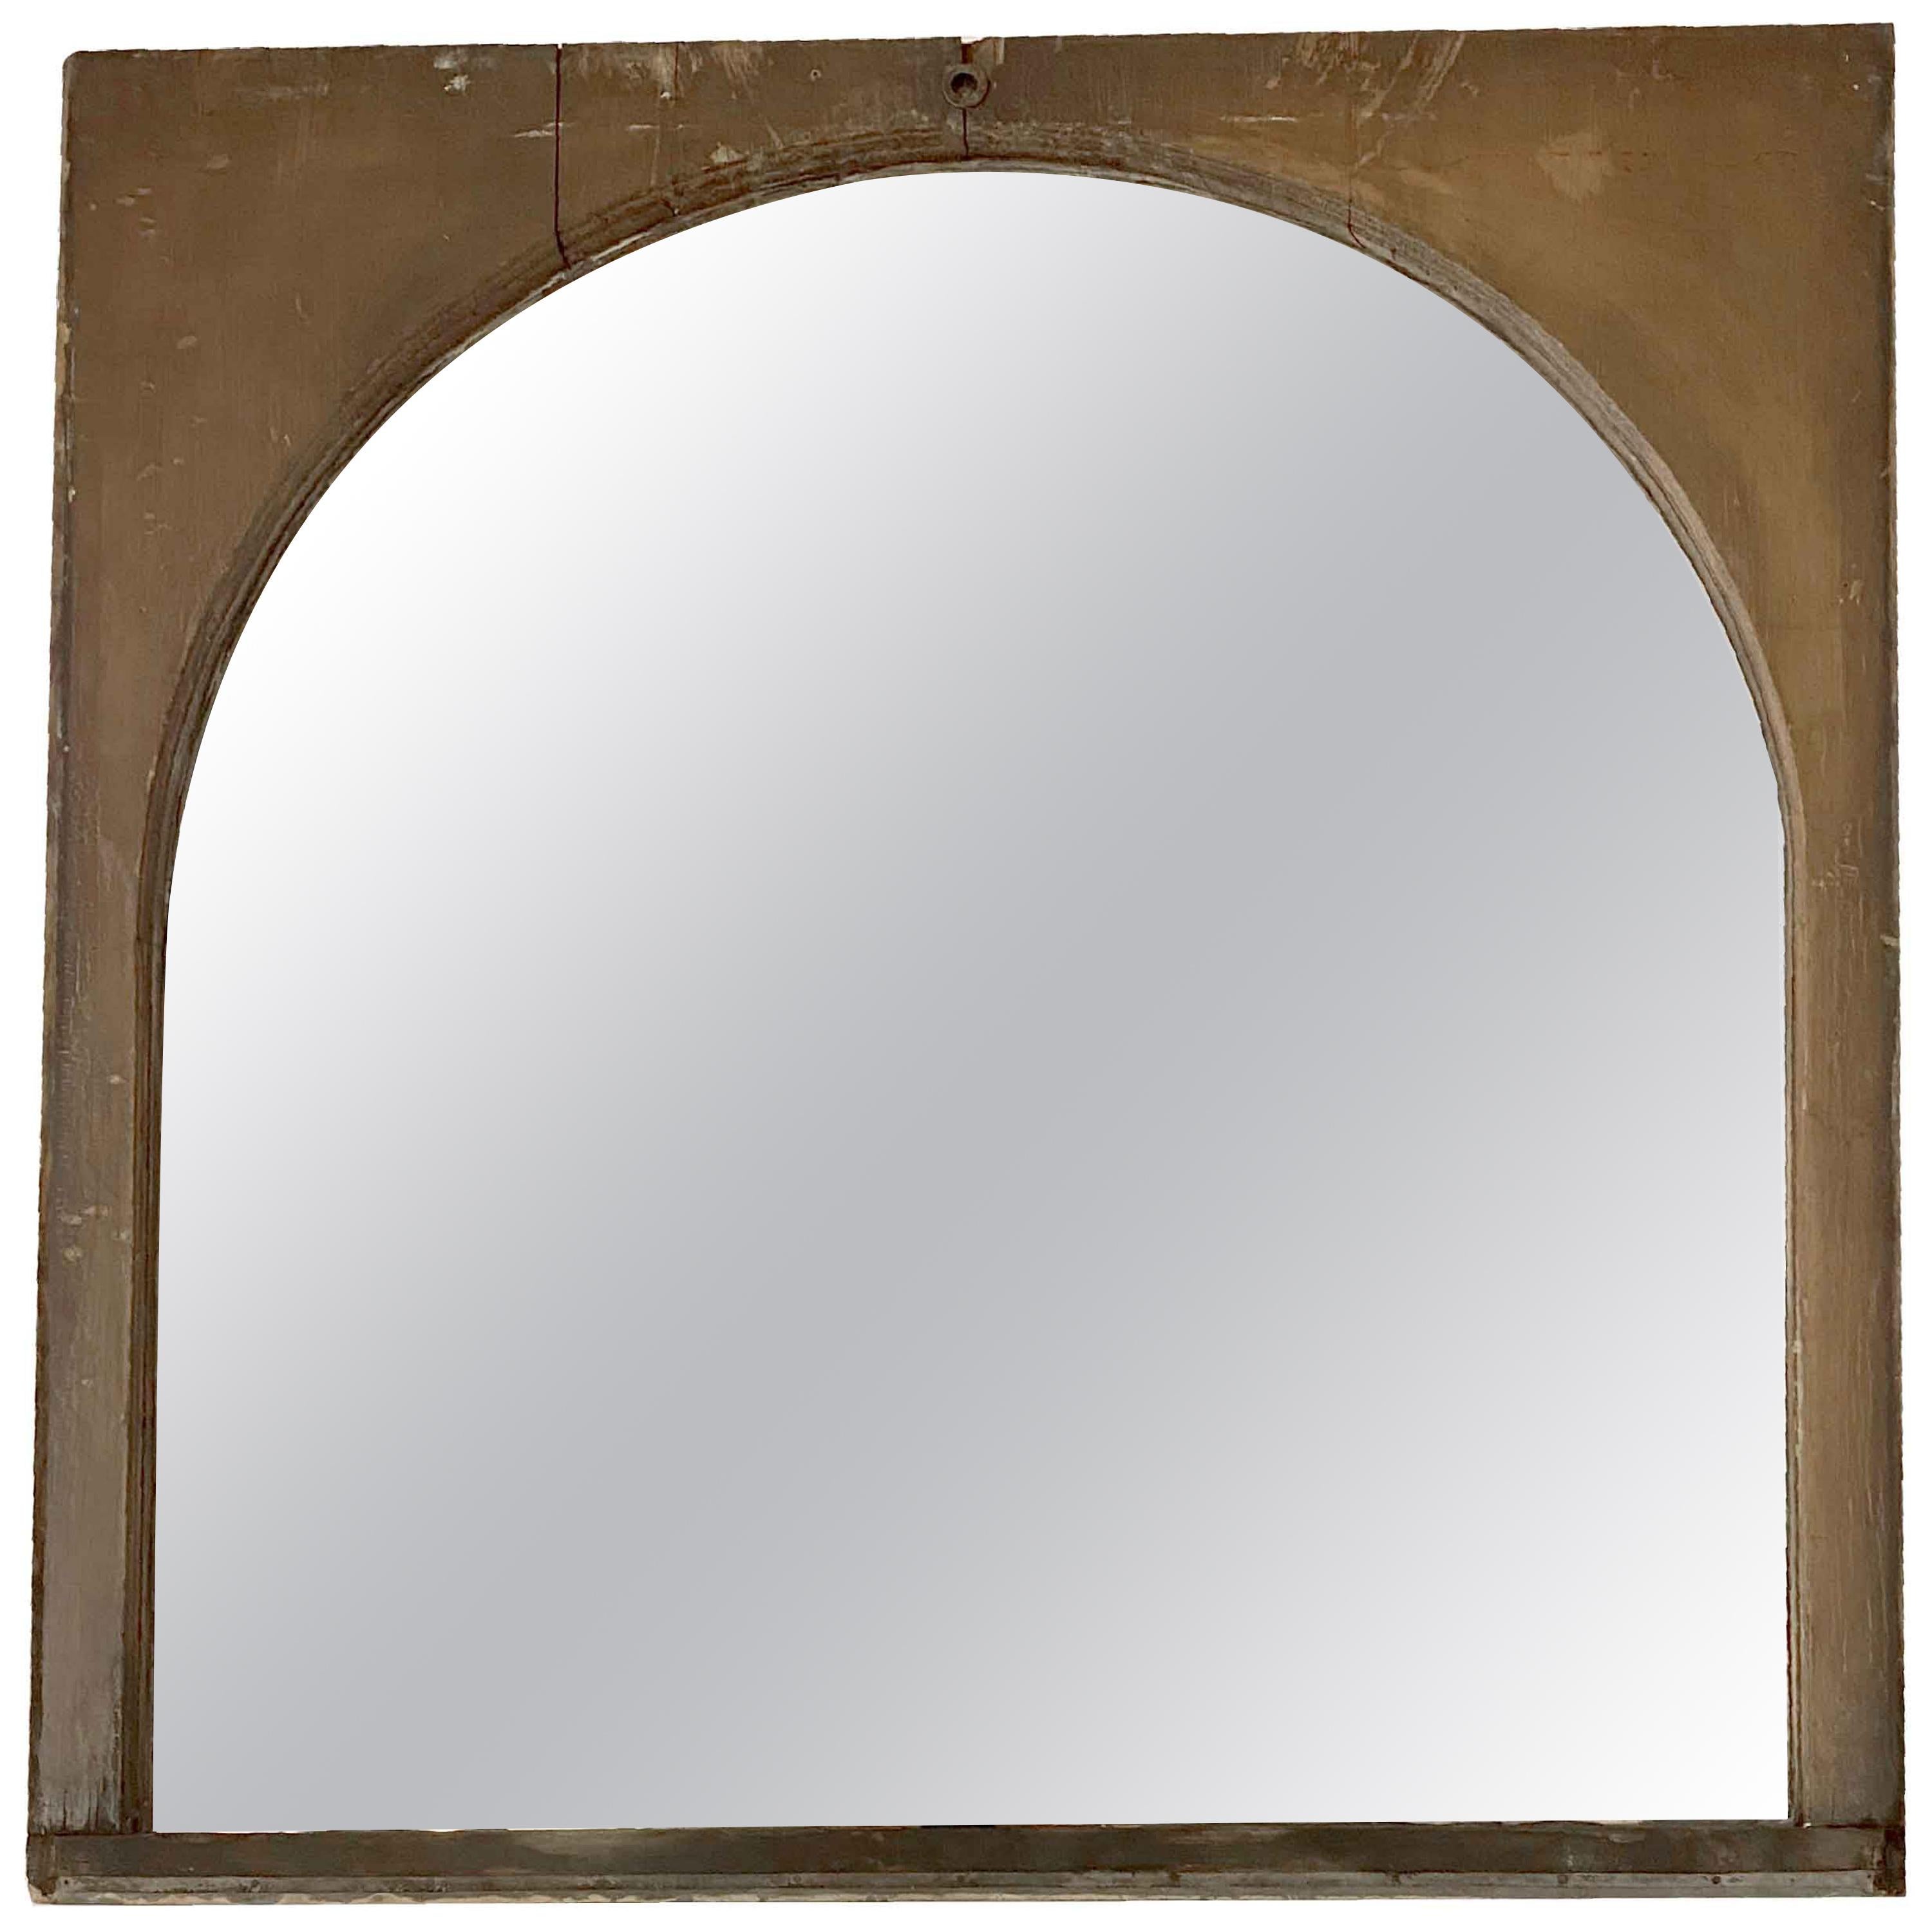 1920s Arched Wood Window with Antiqued Mirror